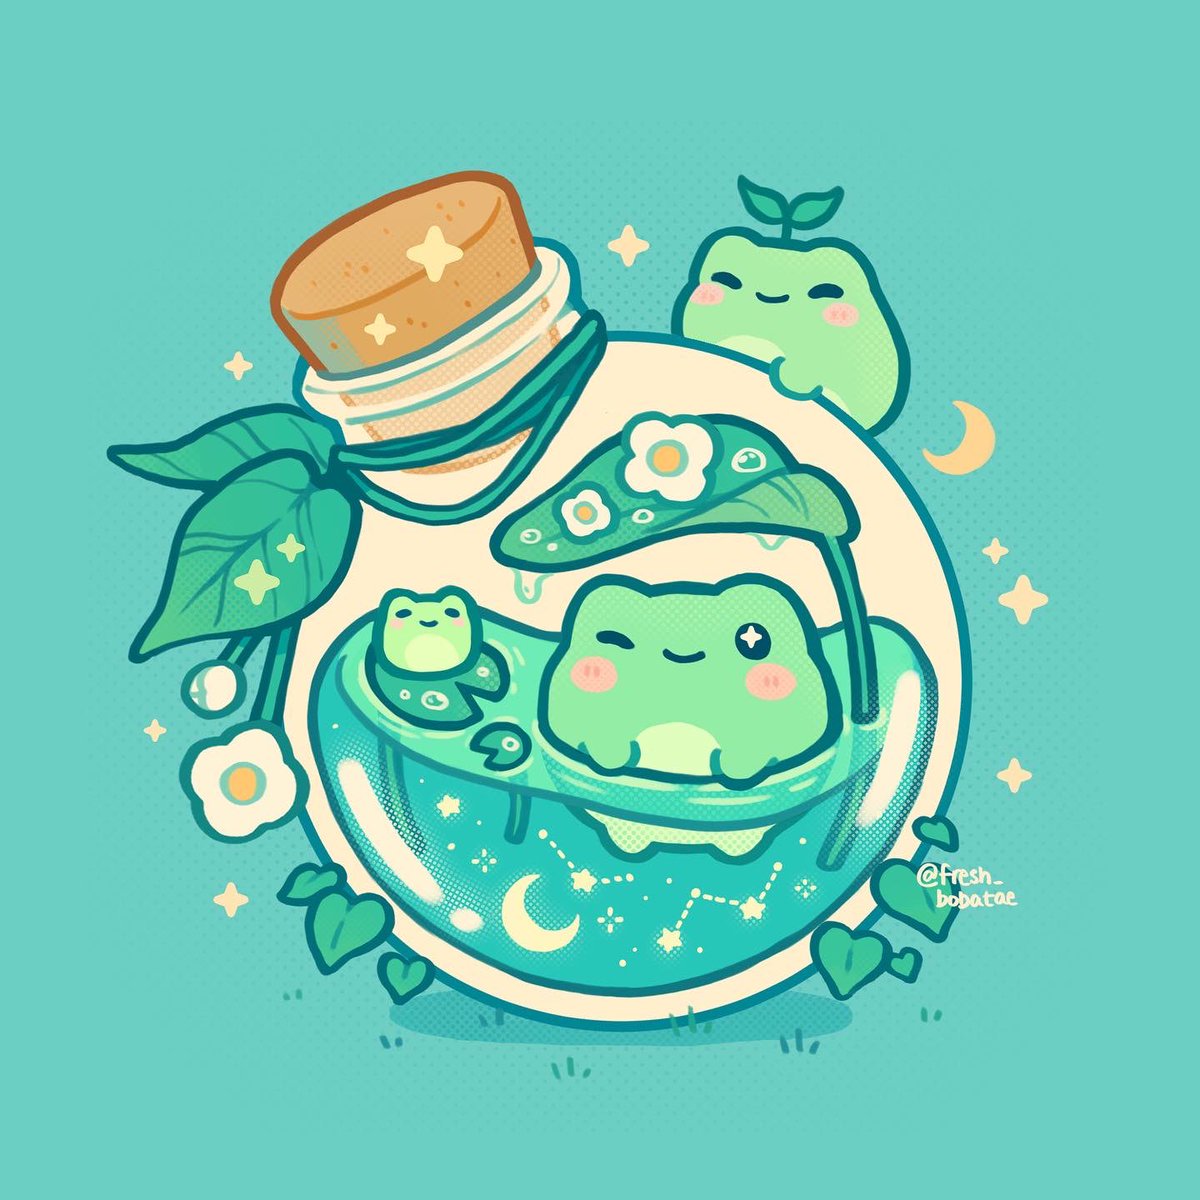 「frog potion 」|Emily 🍊🧡のイラスト